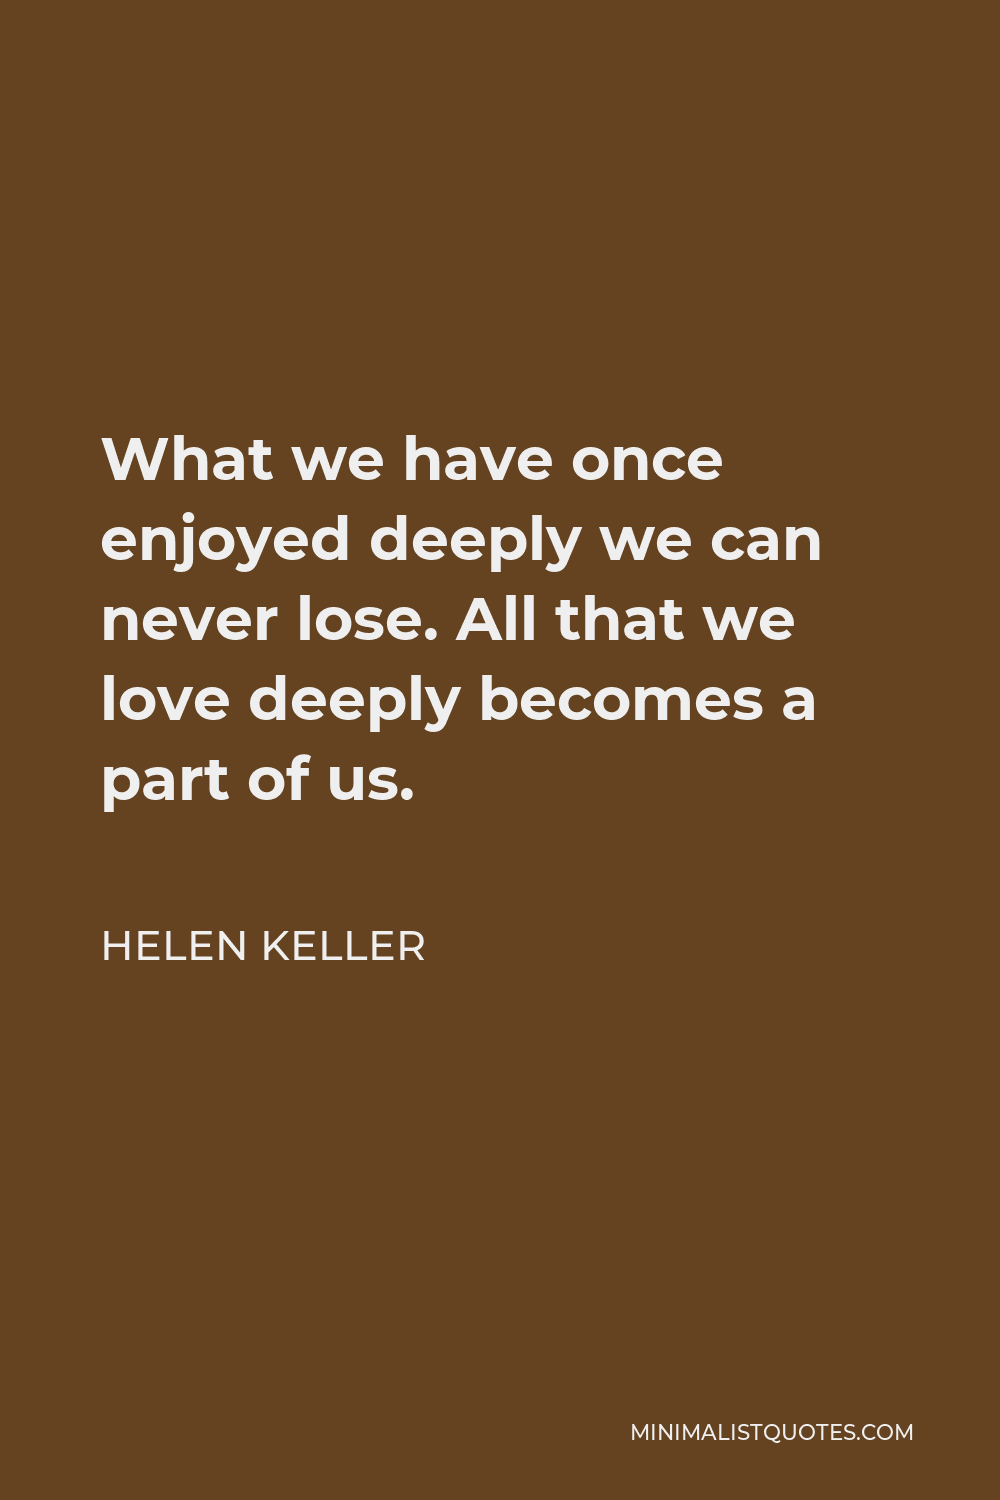 Helen Keller Quote - What we have once enjoyed deeply we can never lose. All that we love deeply becomes a part of us.